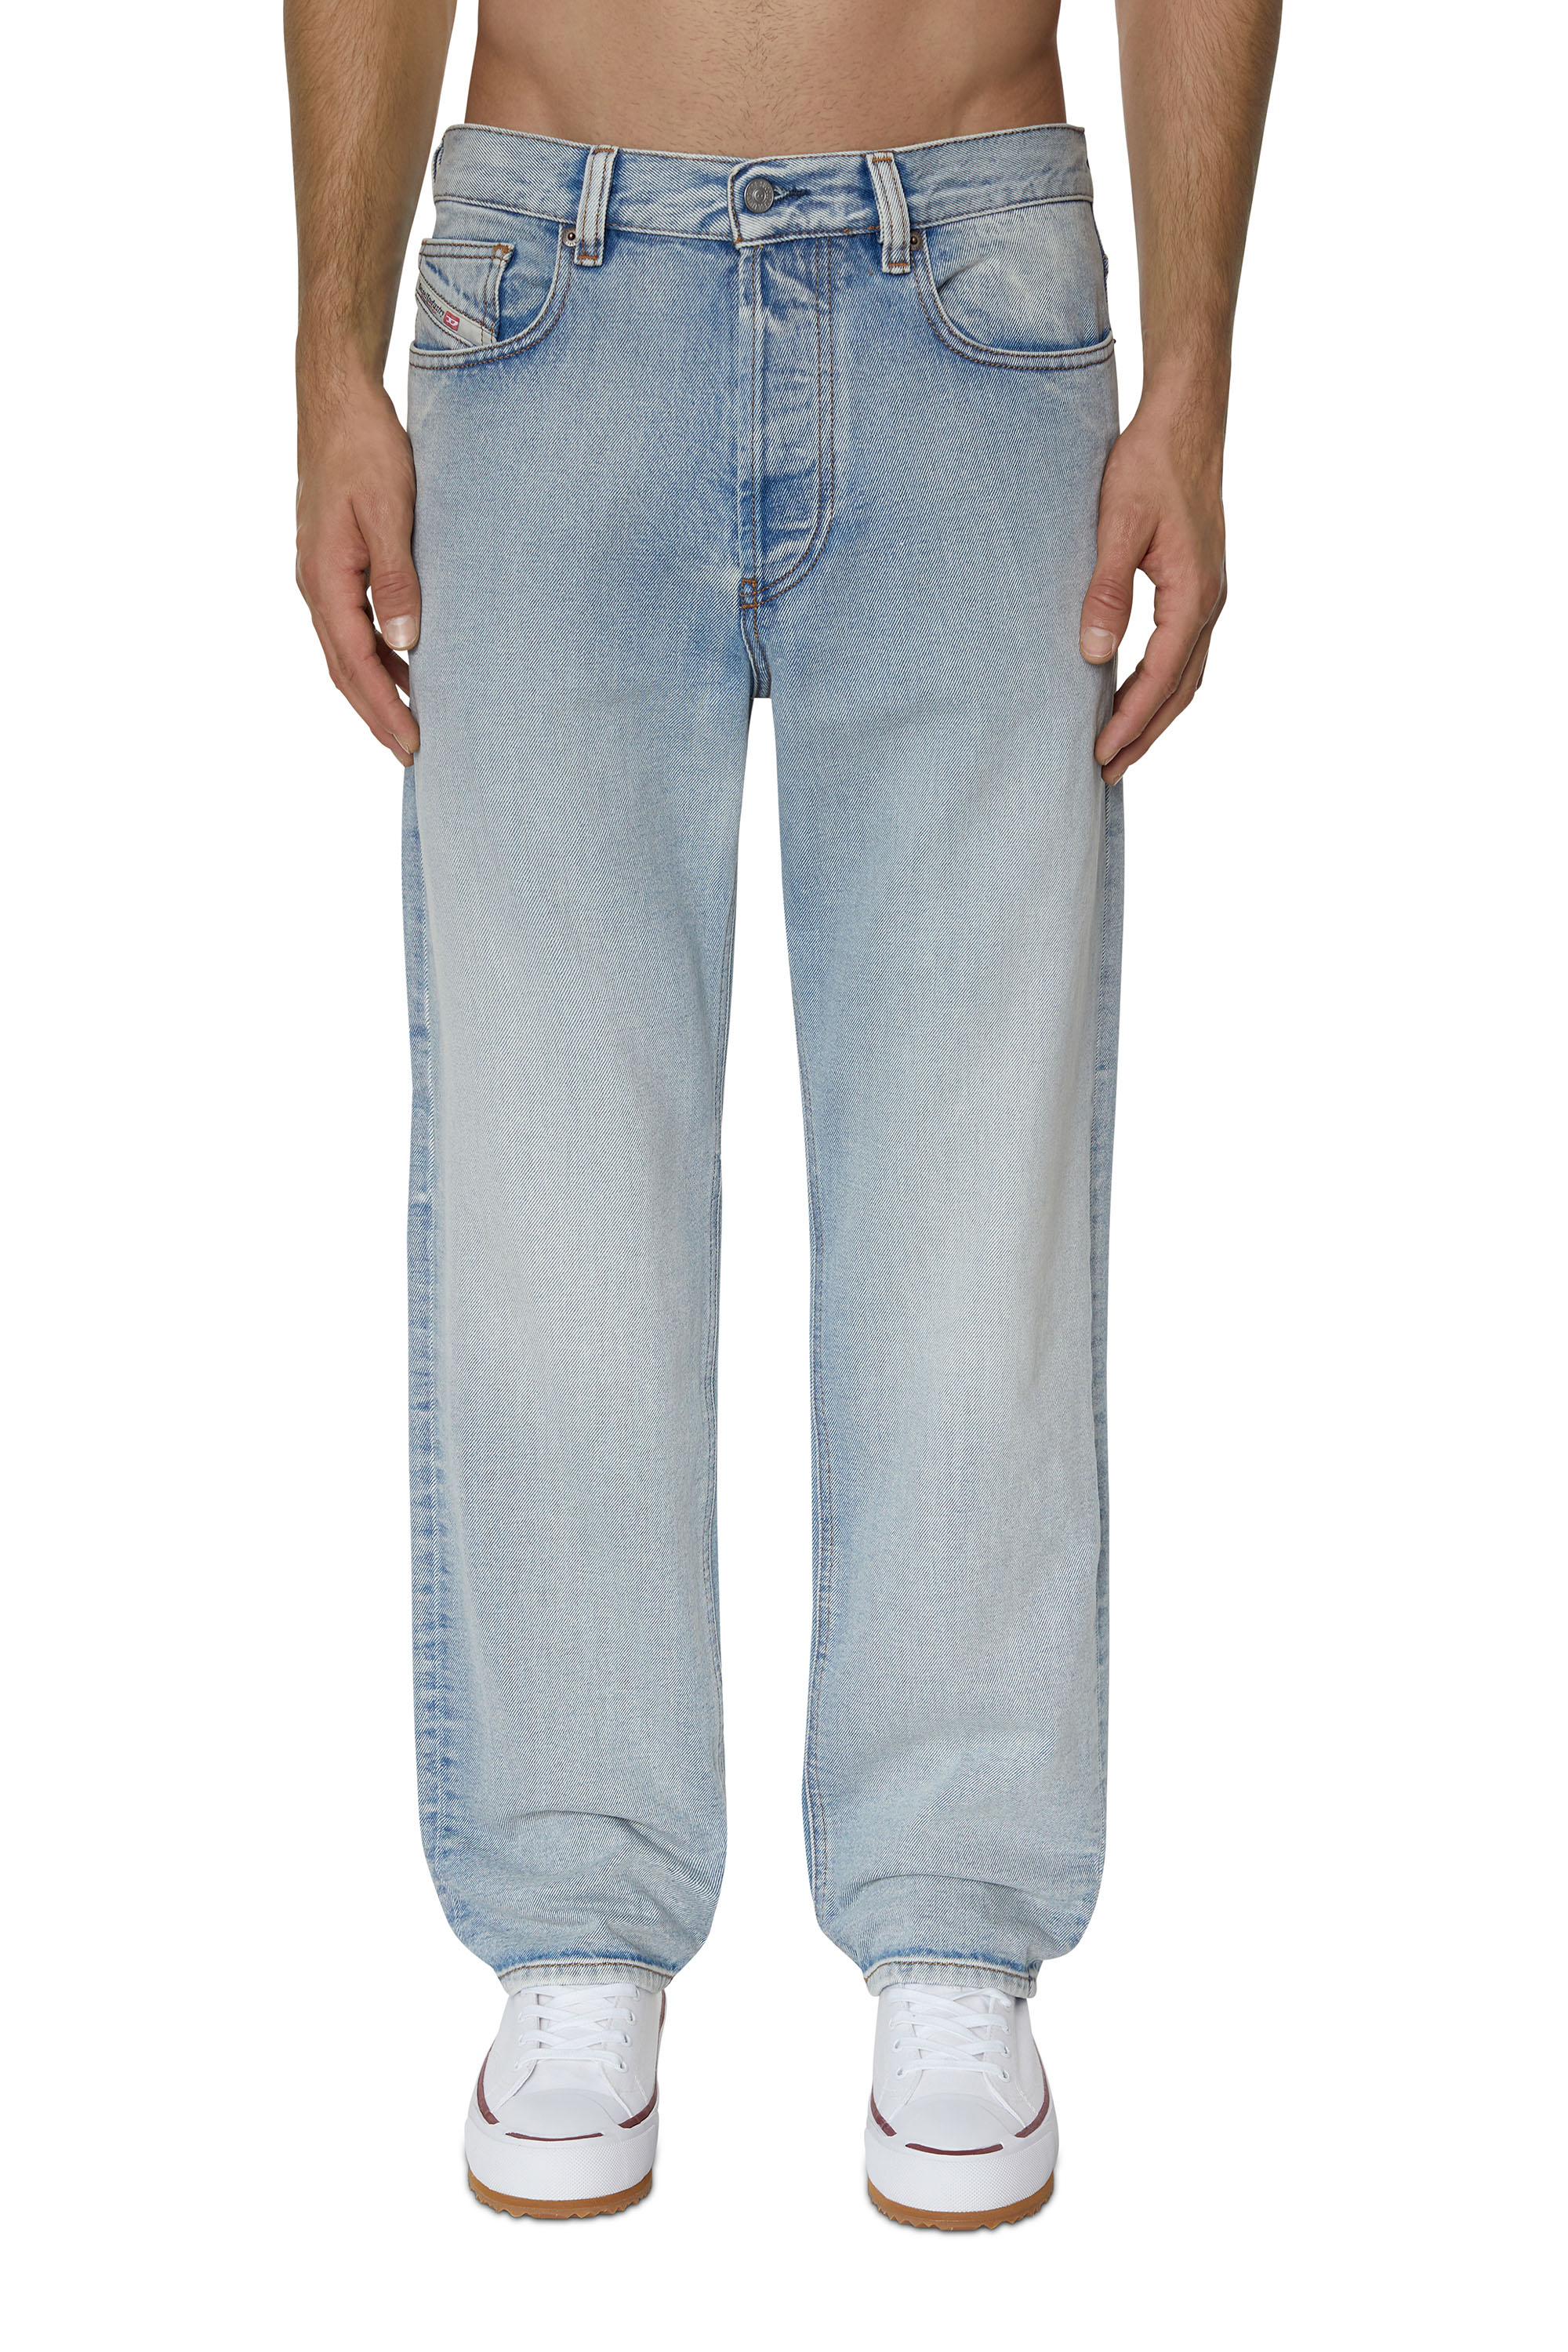 Minder dan Wordt erger Winst The D-franky straight jeans you are looking for has evolved